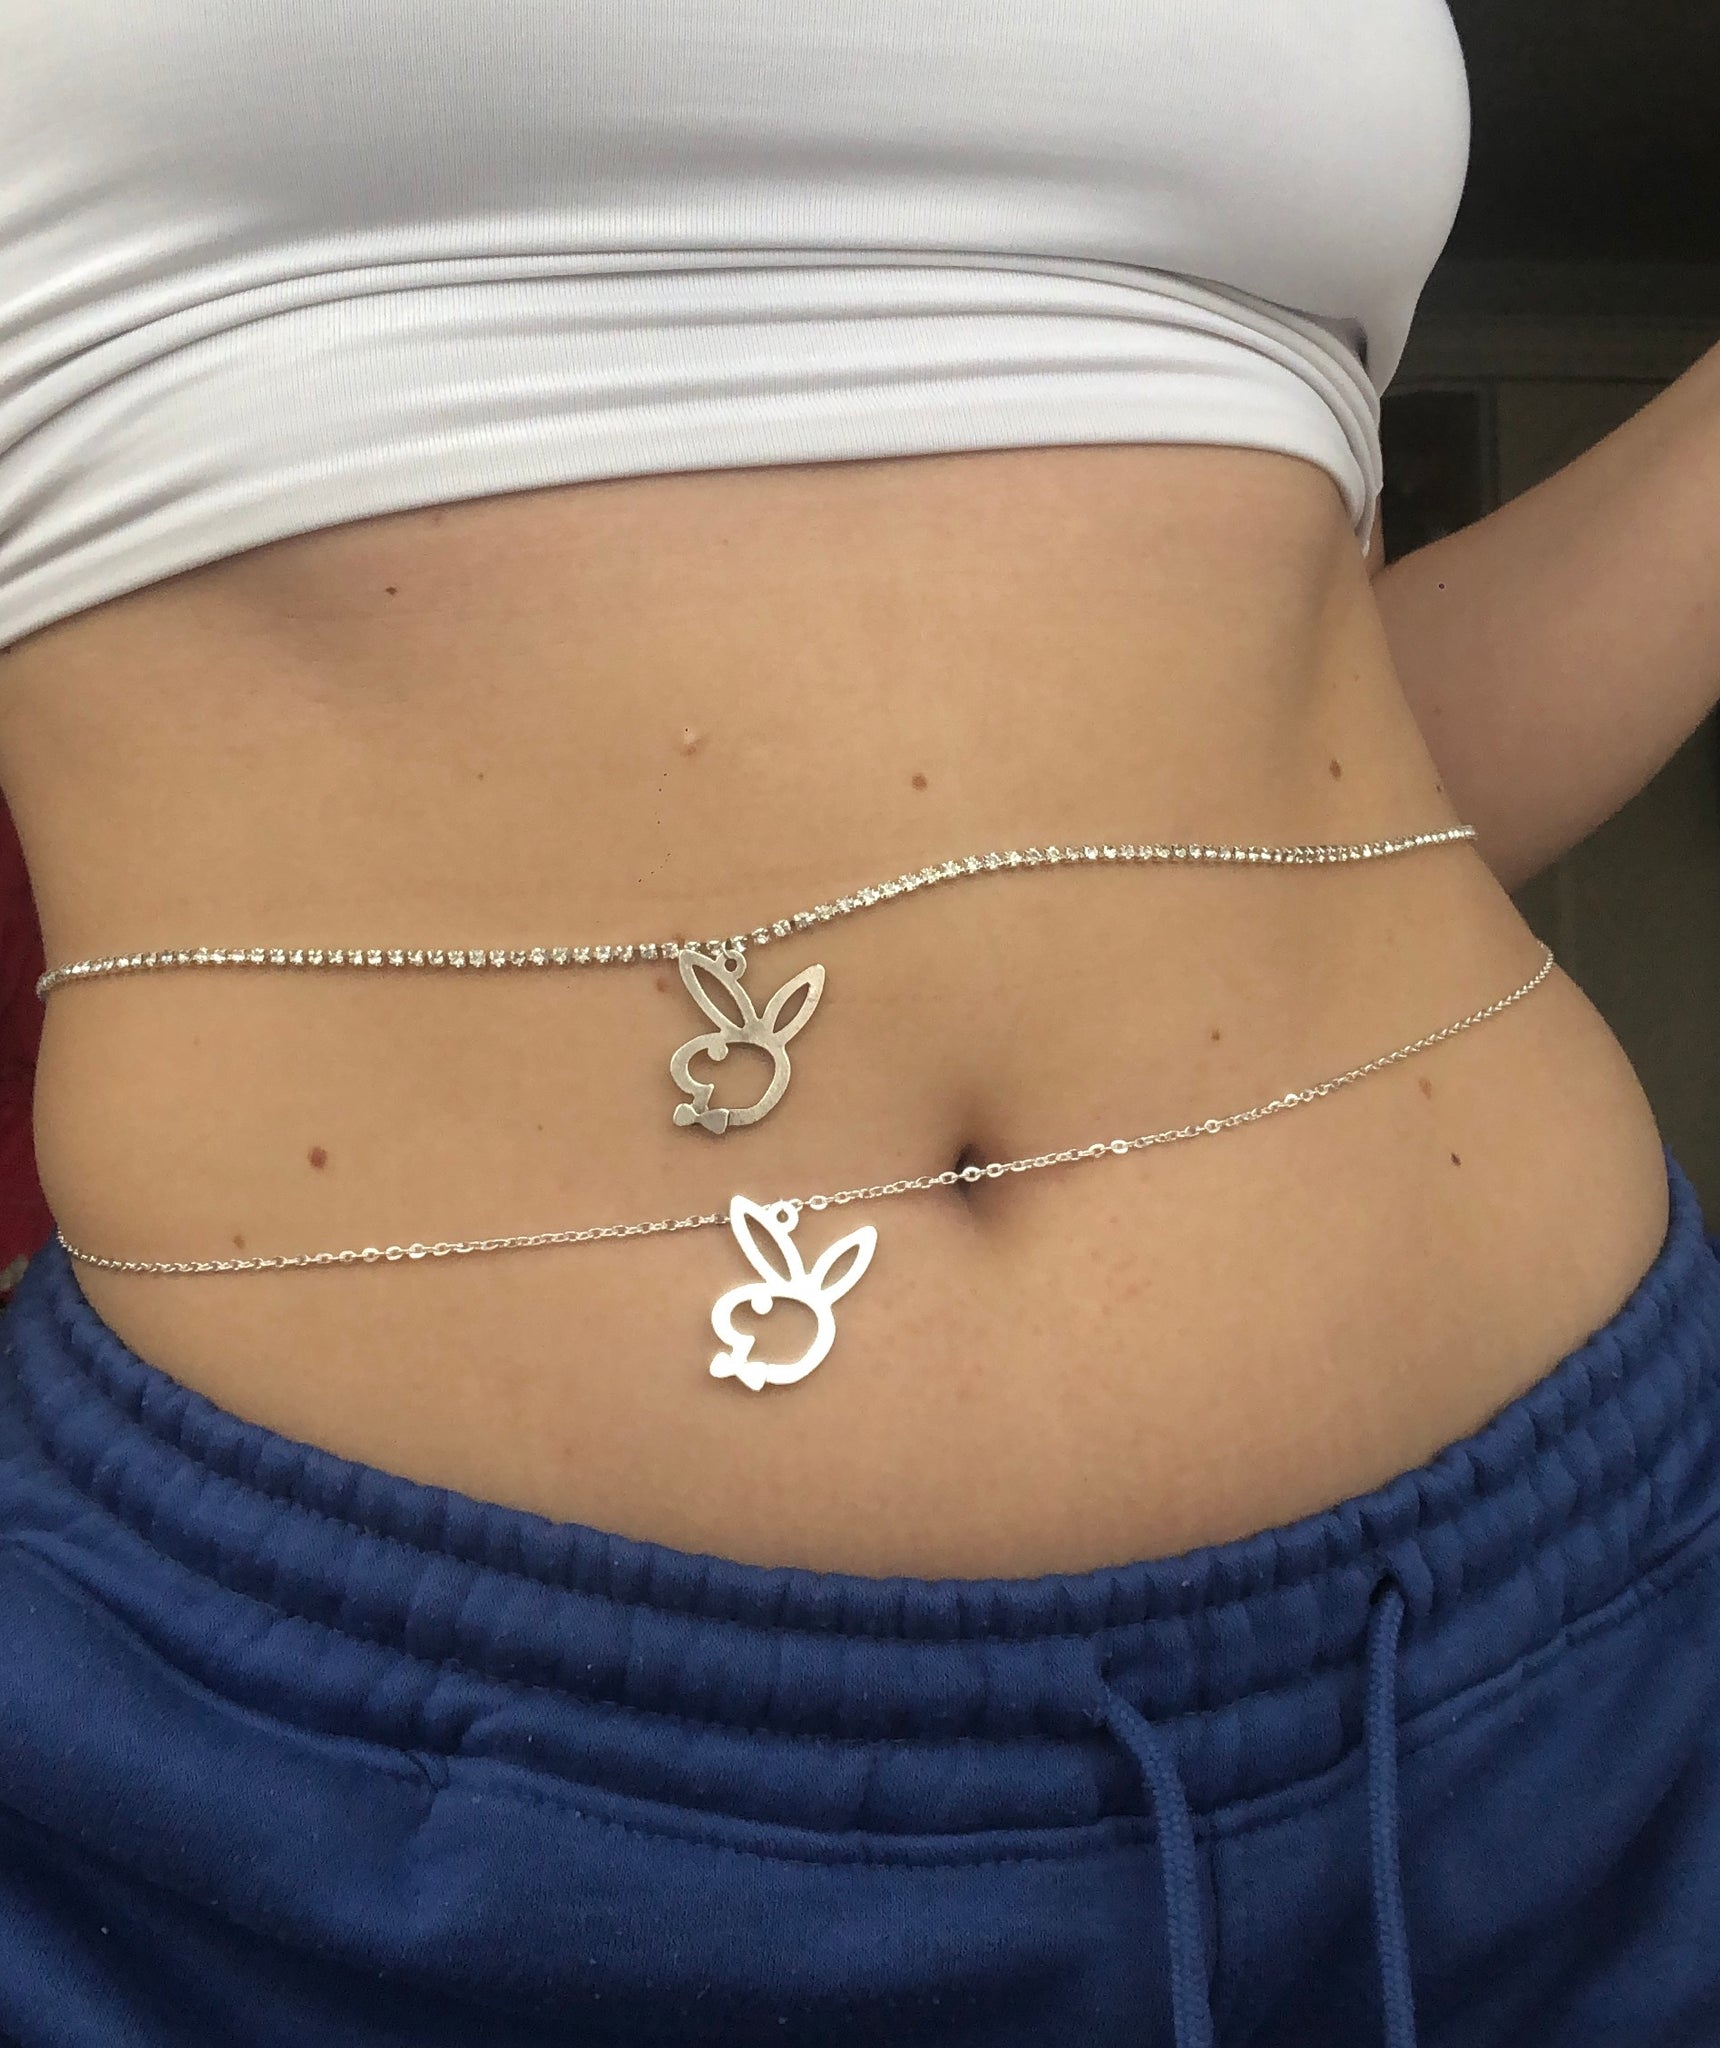 Belly Chain Body Jewelry, Sexy Inlaid Zircon Chain Texture Simple Female  Bikini Beach Nude Drop Delivery From Bdesybag, $6.38 | DHgate.Com